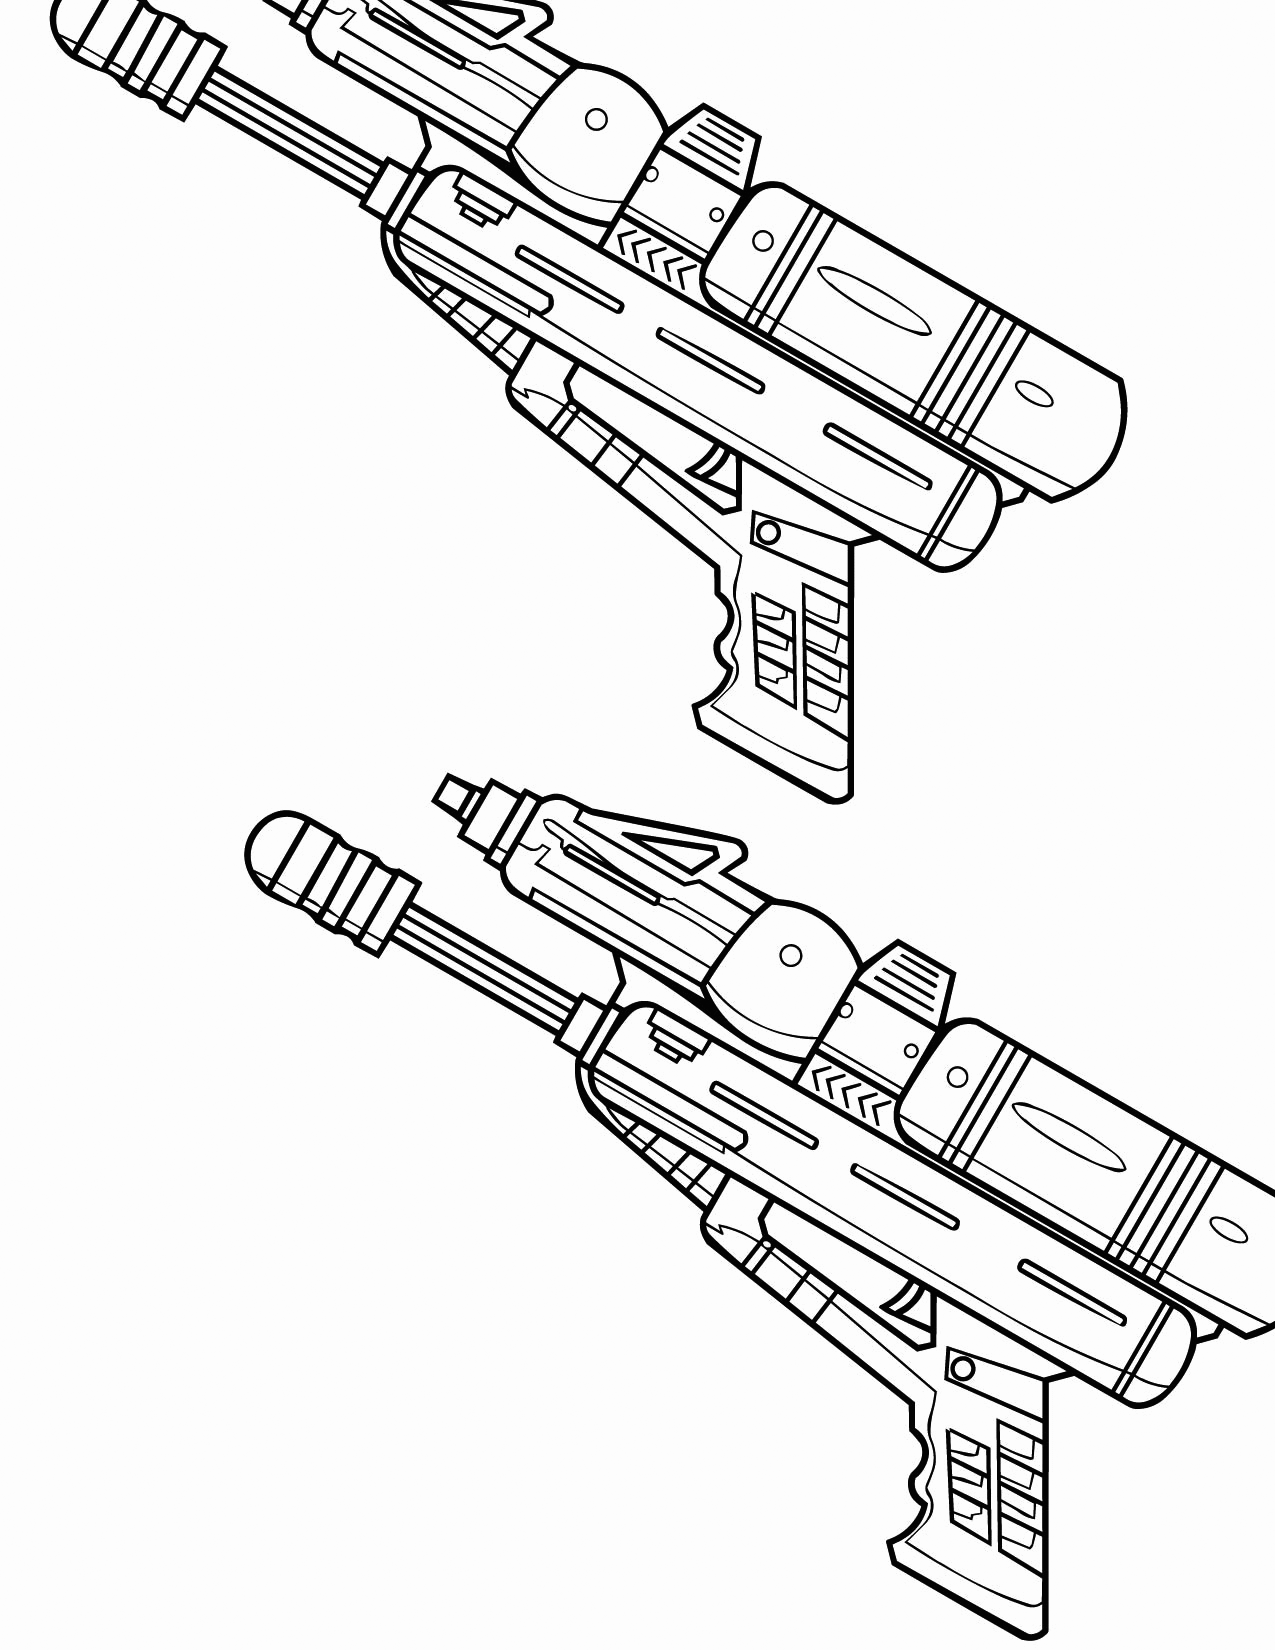 Nerf Gun Coloring Pages Best Coloring Pages For Kids